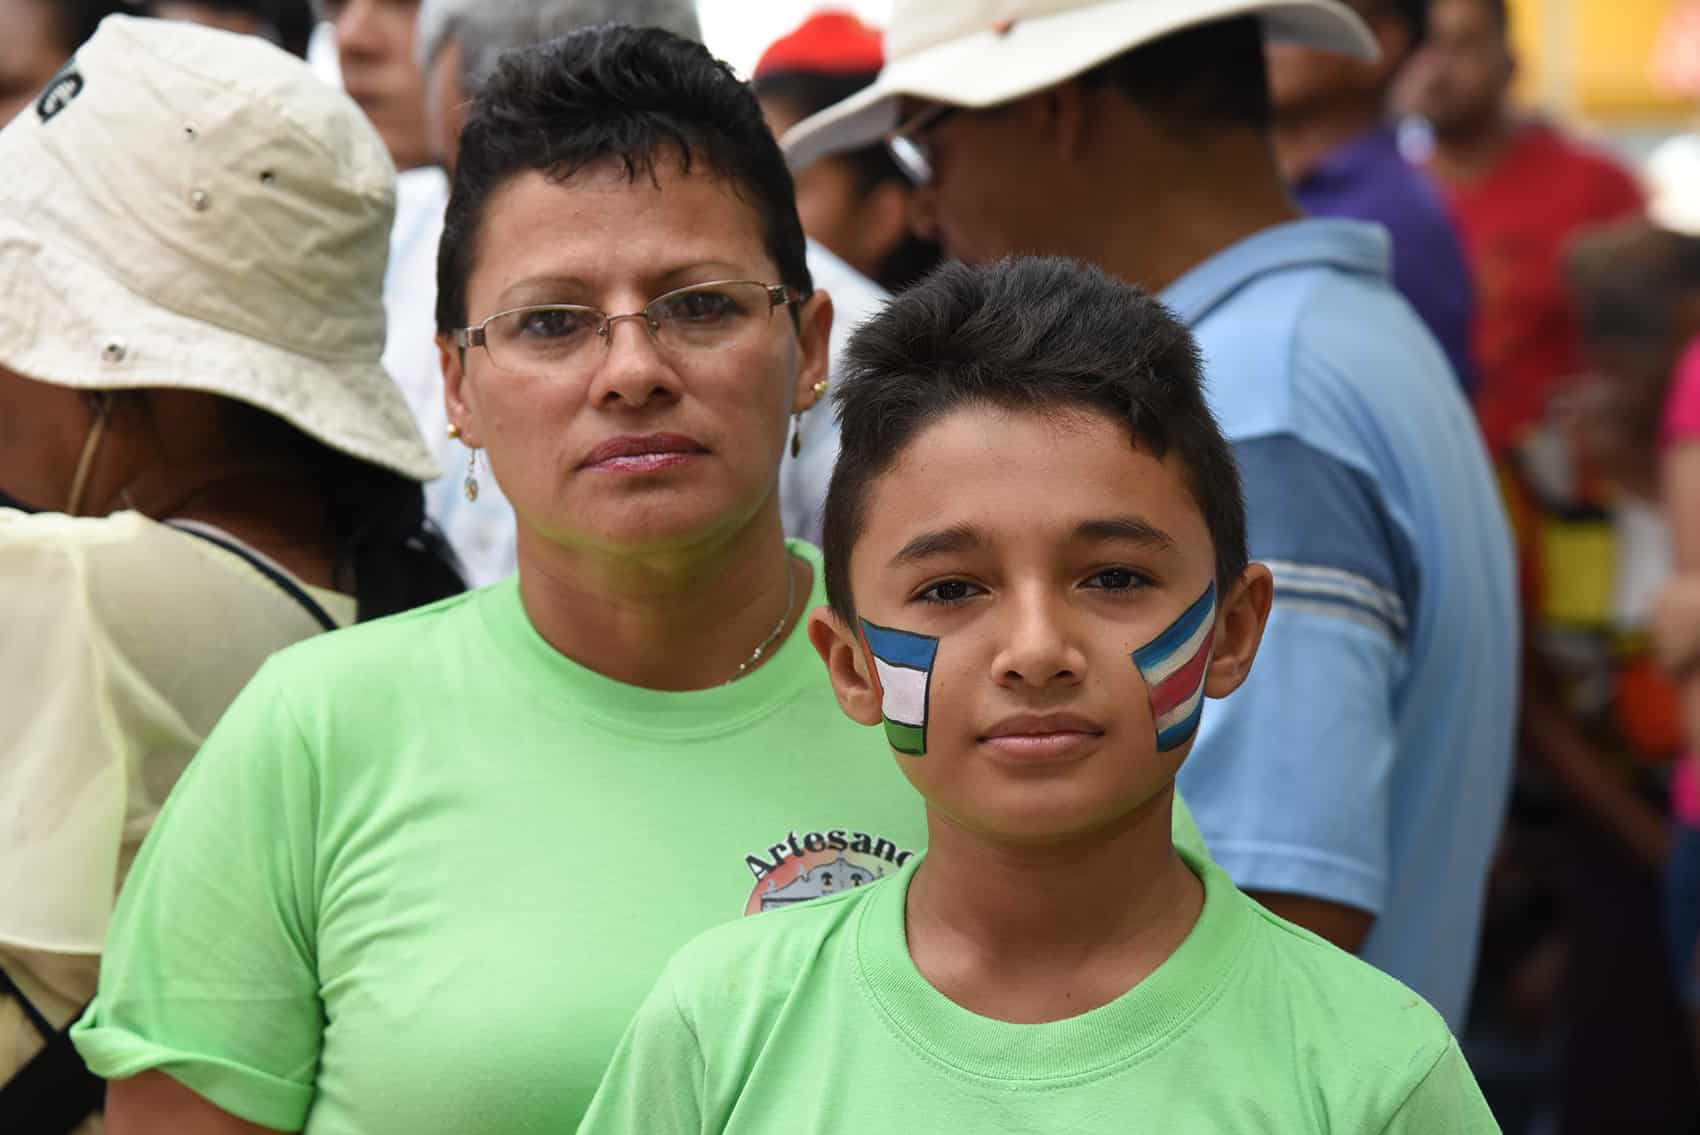 A young Nicoyano proudly wears the Costa Rican and Guanacaste flags.